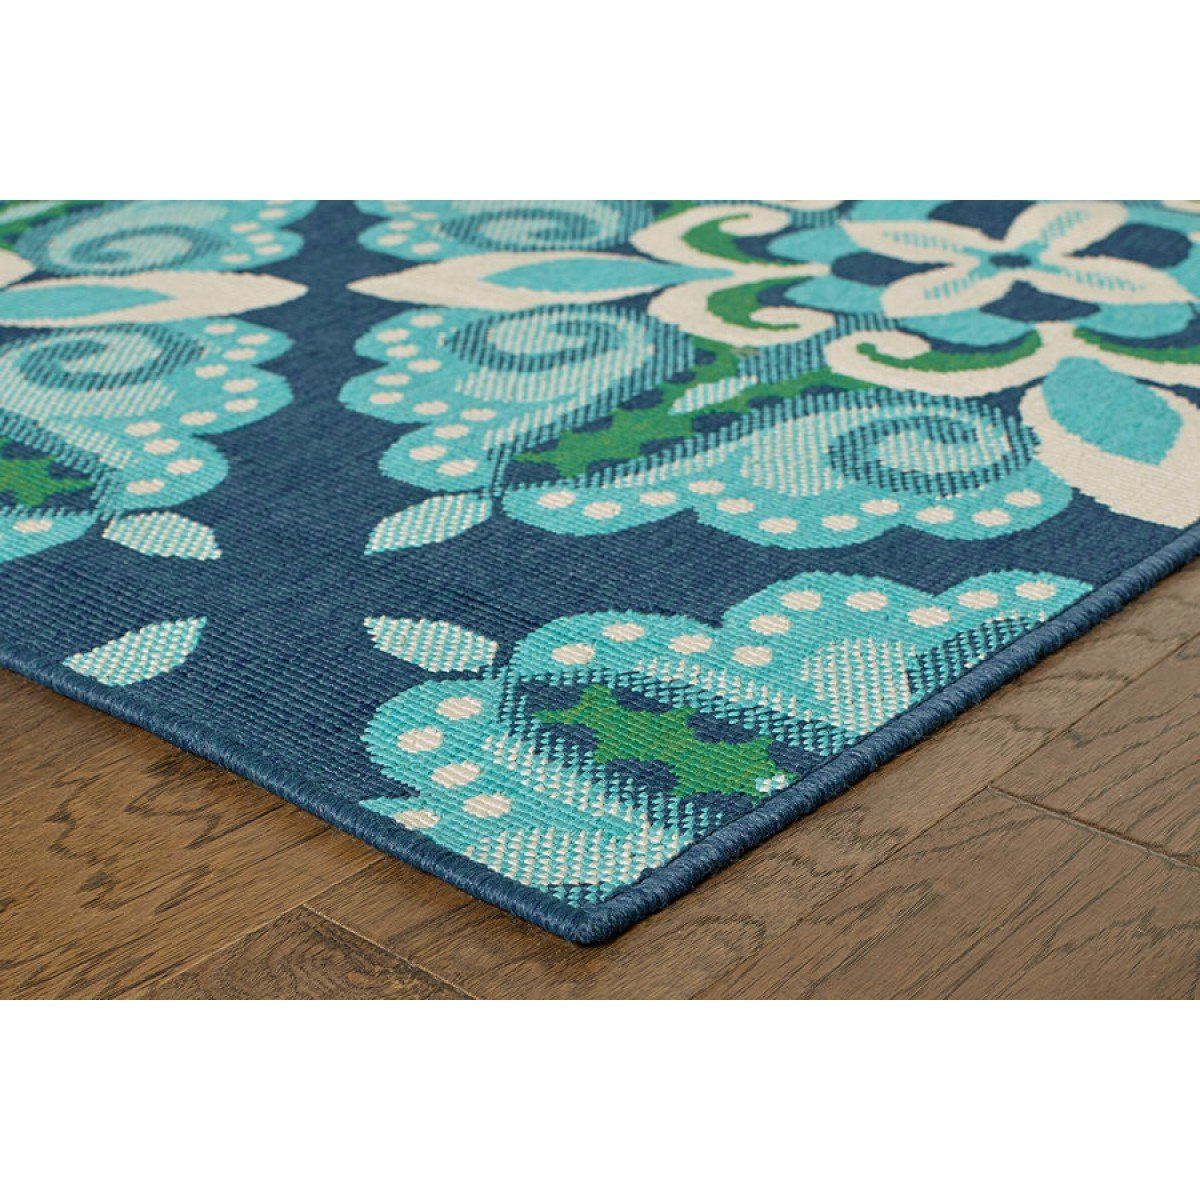 Floral Indoor Outdoor Scatter Rug - Blue And Green - 2’ x 3’